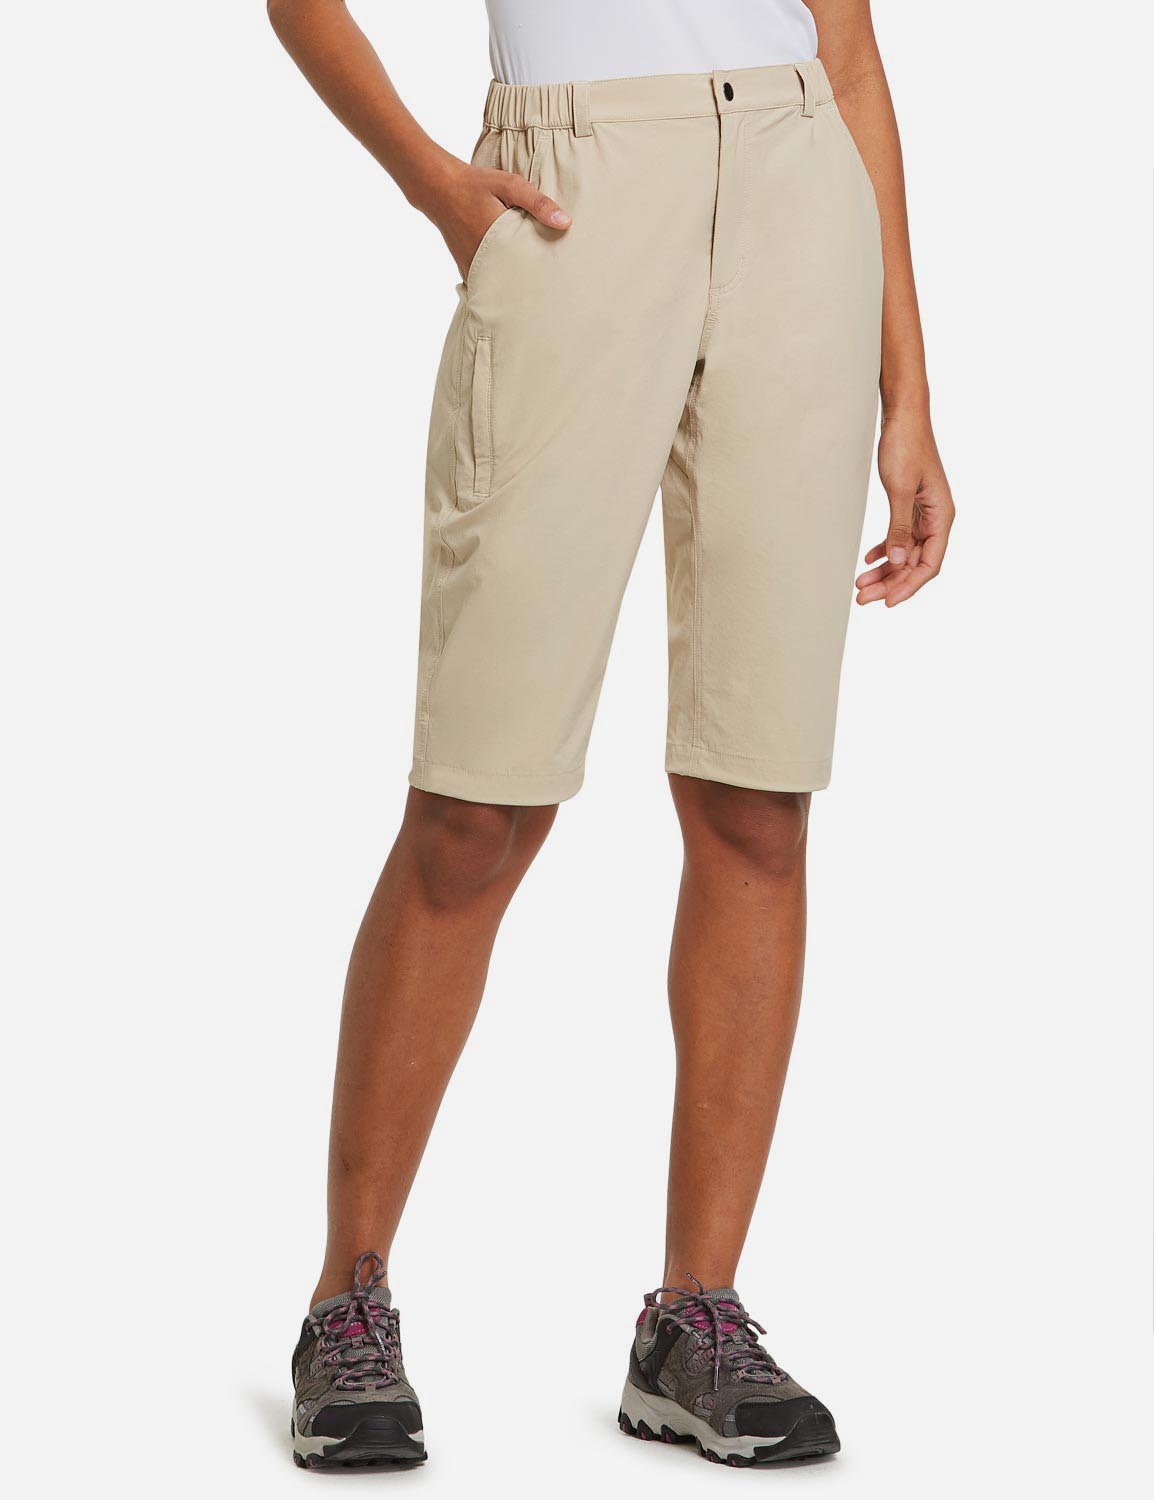 Baleaf Women's UPF50+ Quick Dry DWR Knee High Outdoor Shorts agb035 Khaki Front